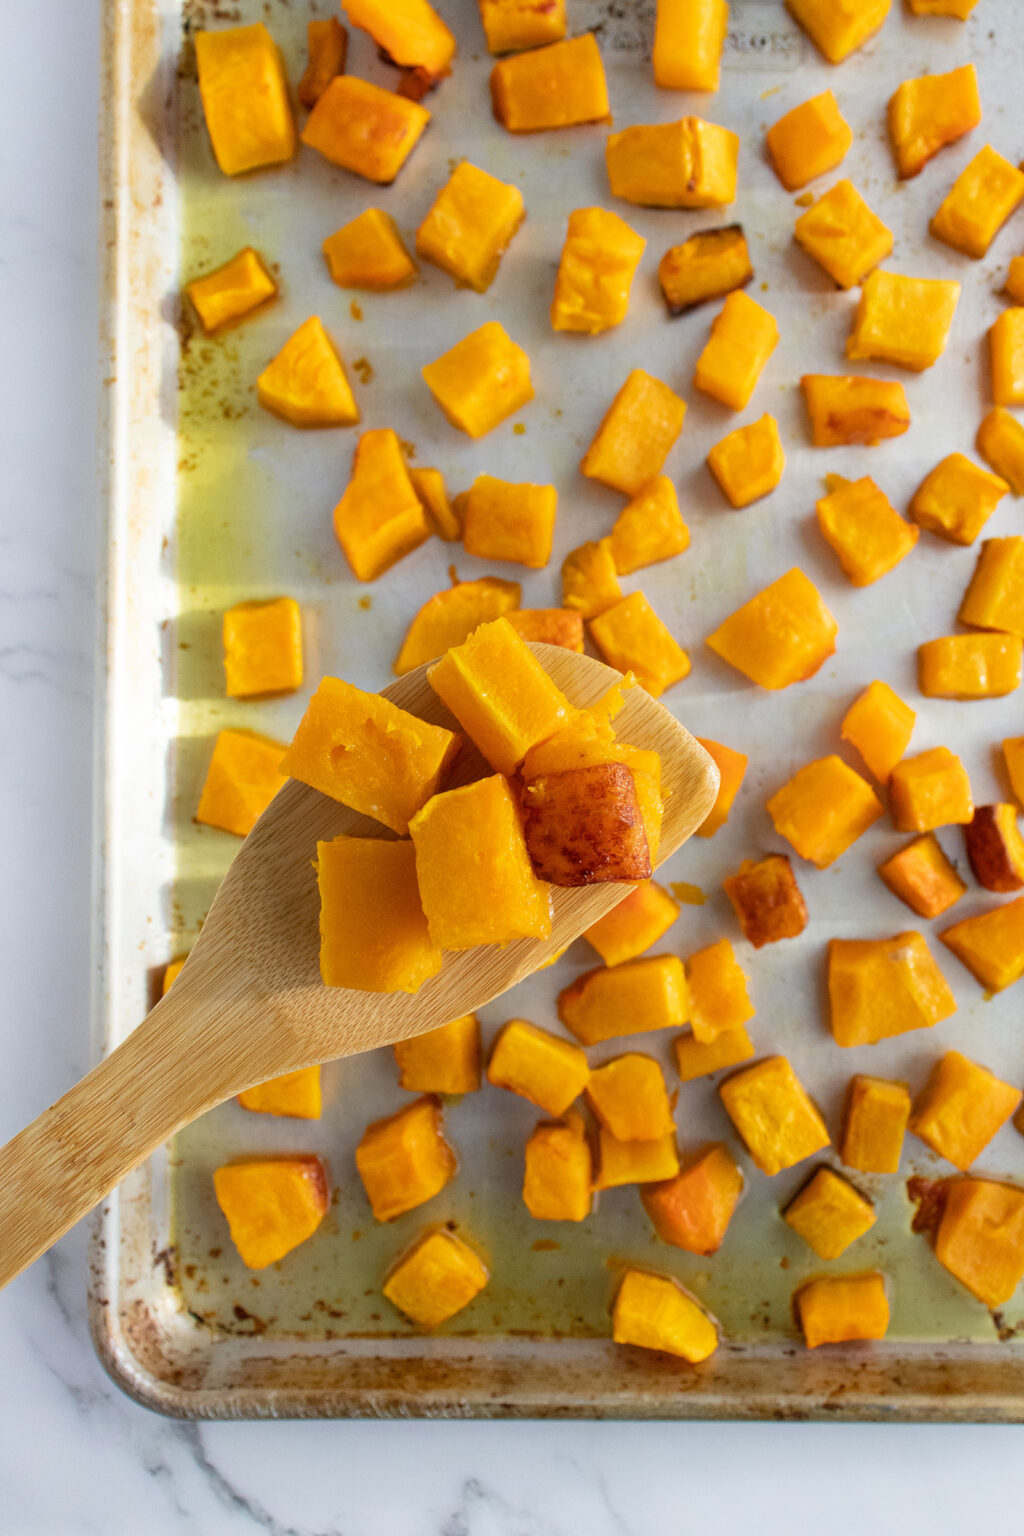 How to Roast Butternut Squash - The Kitchen Magpie